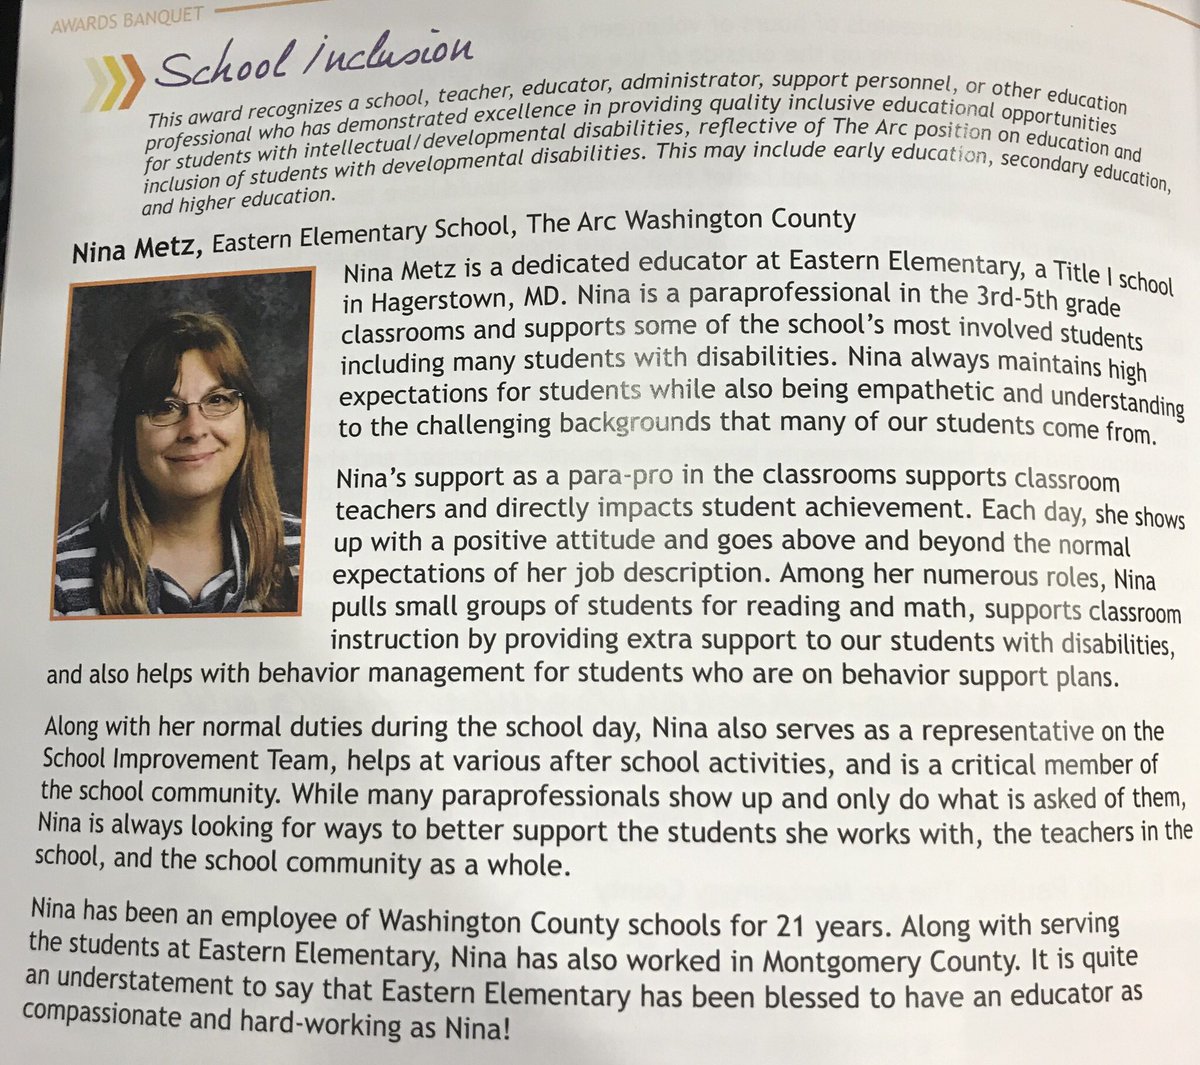 Congratulations to Nina Metz who was honored by @thearcmd with their School Inclusion Award! Nina was one of 3 educators in the state of MD to receive this award! Thank you Nina for all that you do for our students everyday! #TheArcMDConvention2019 #OpportUNITY